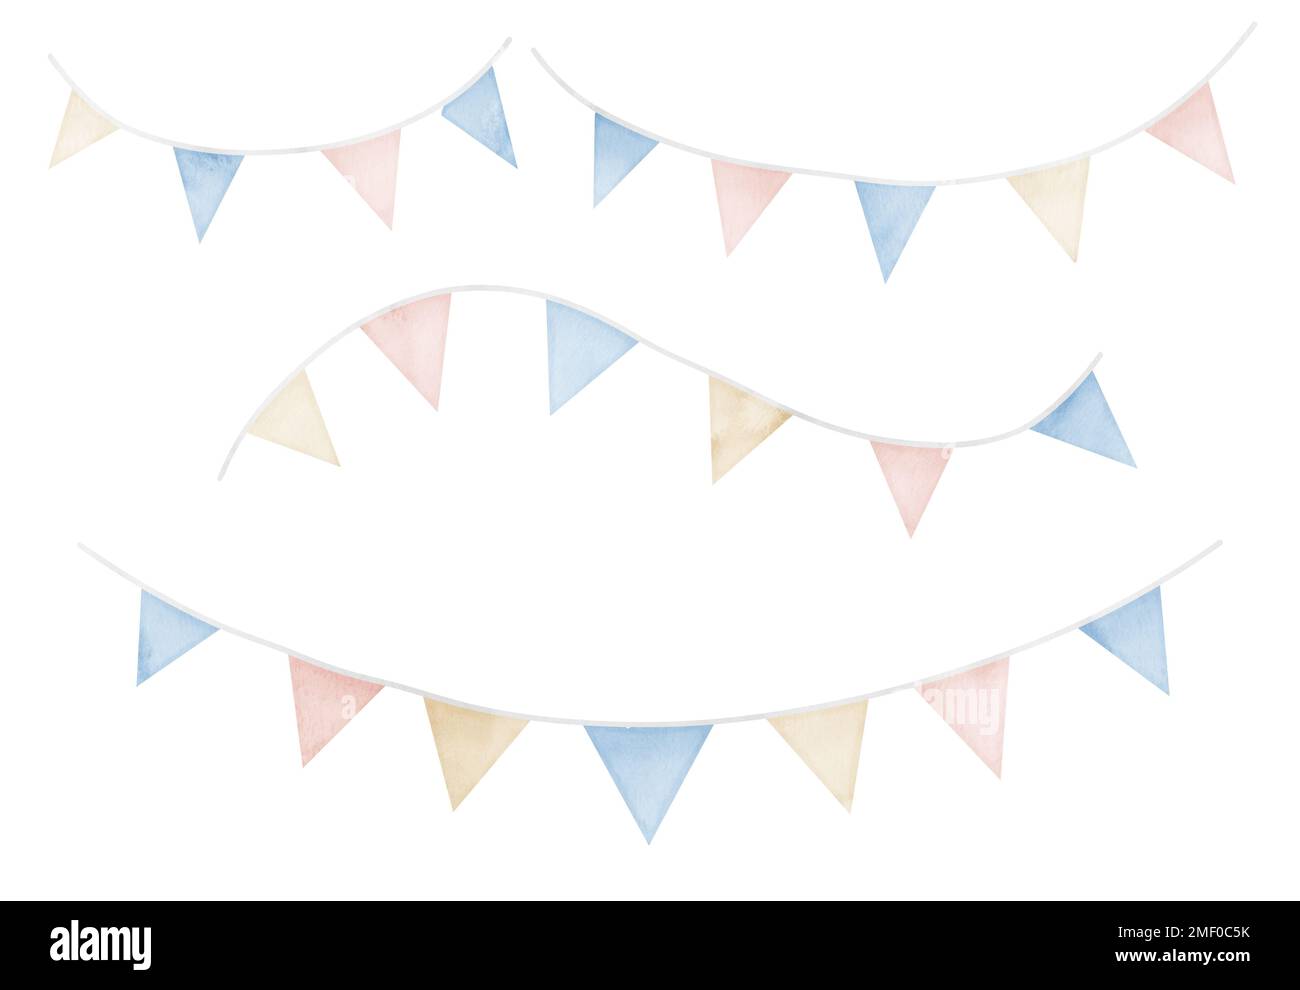 Watercolor Garlands set. Hand drawn illustration of Pennant on isolated background in pastel blue and pink colors. Hanging with triangular flags for party celebration. Decor for happy birthday. Stock Photo